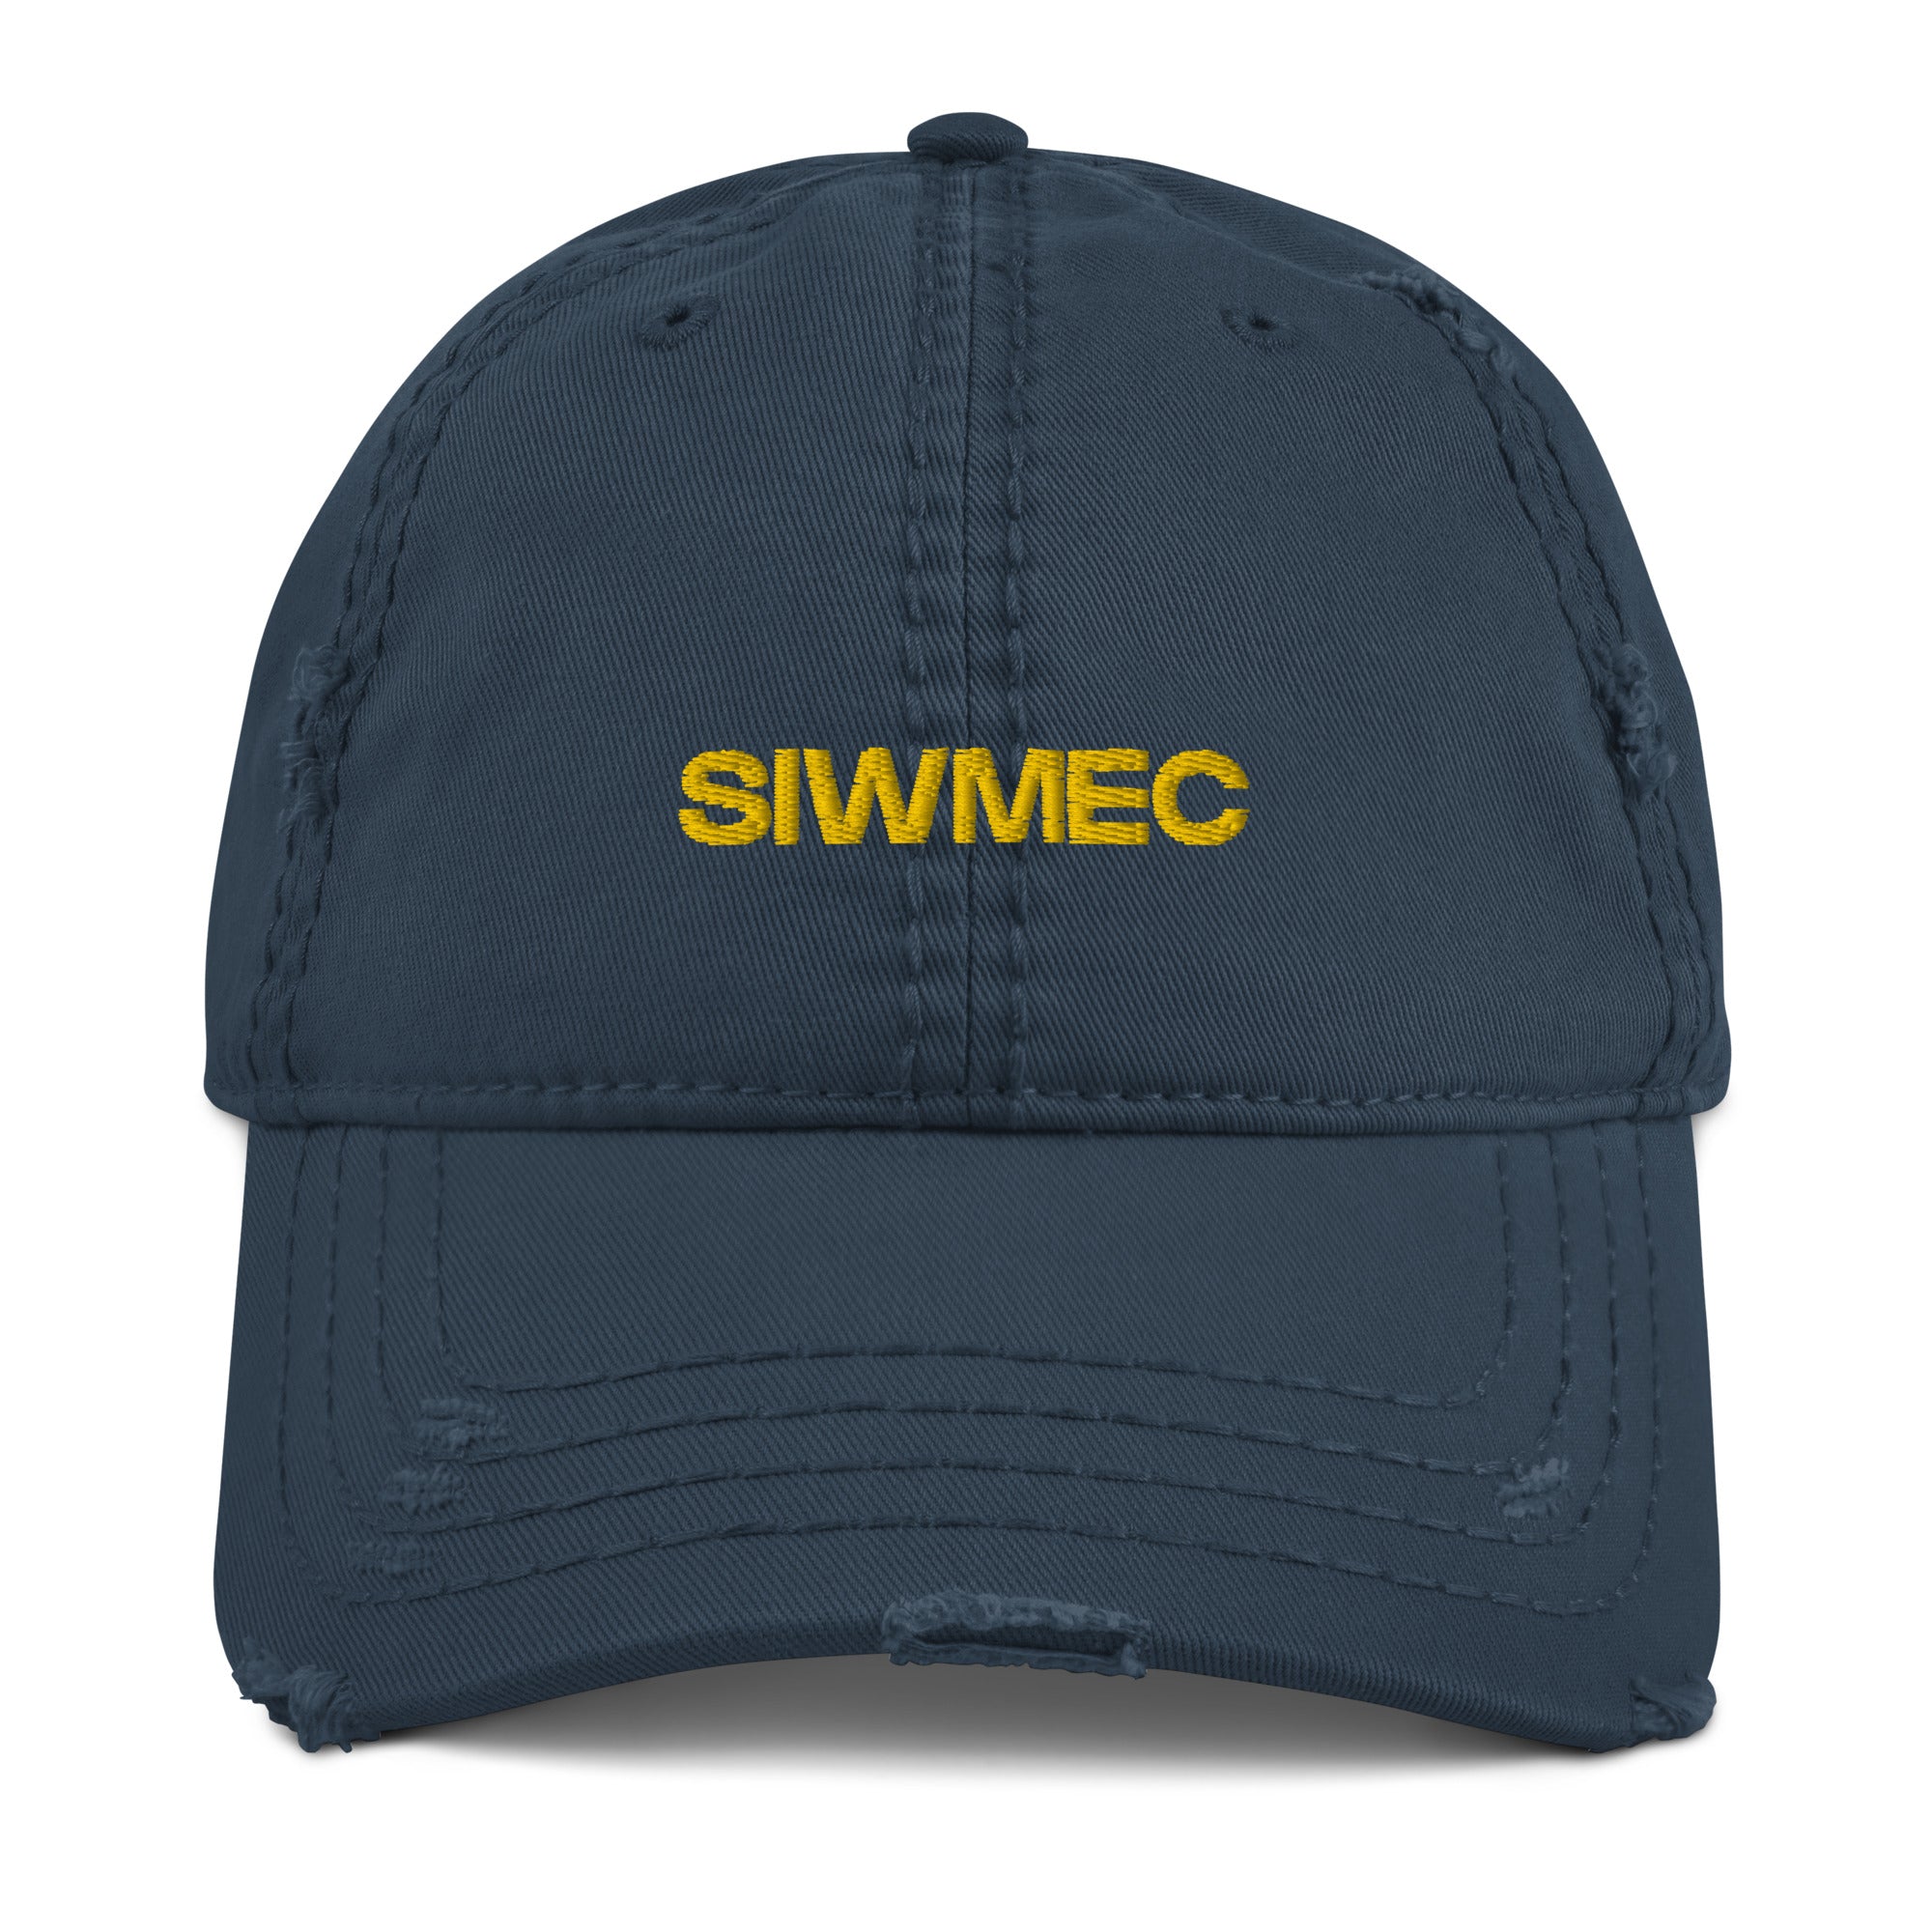 Navy Blue Embroidered "SIWMEC" Cap